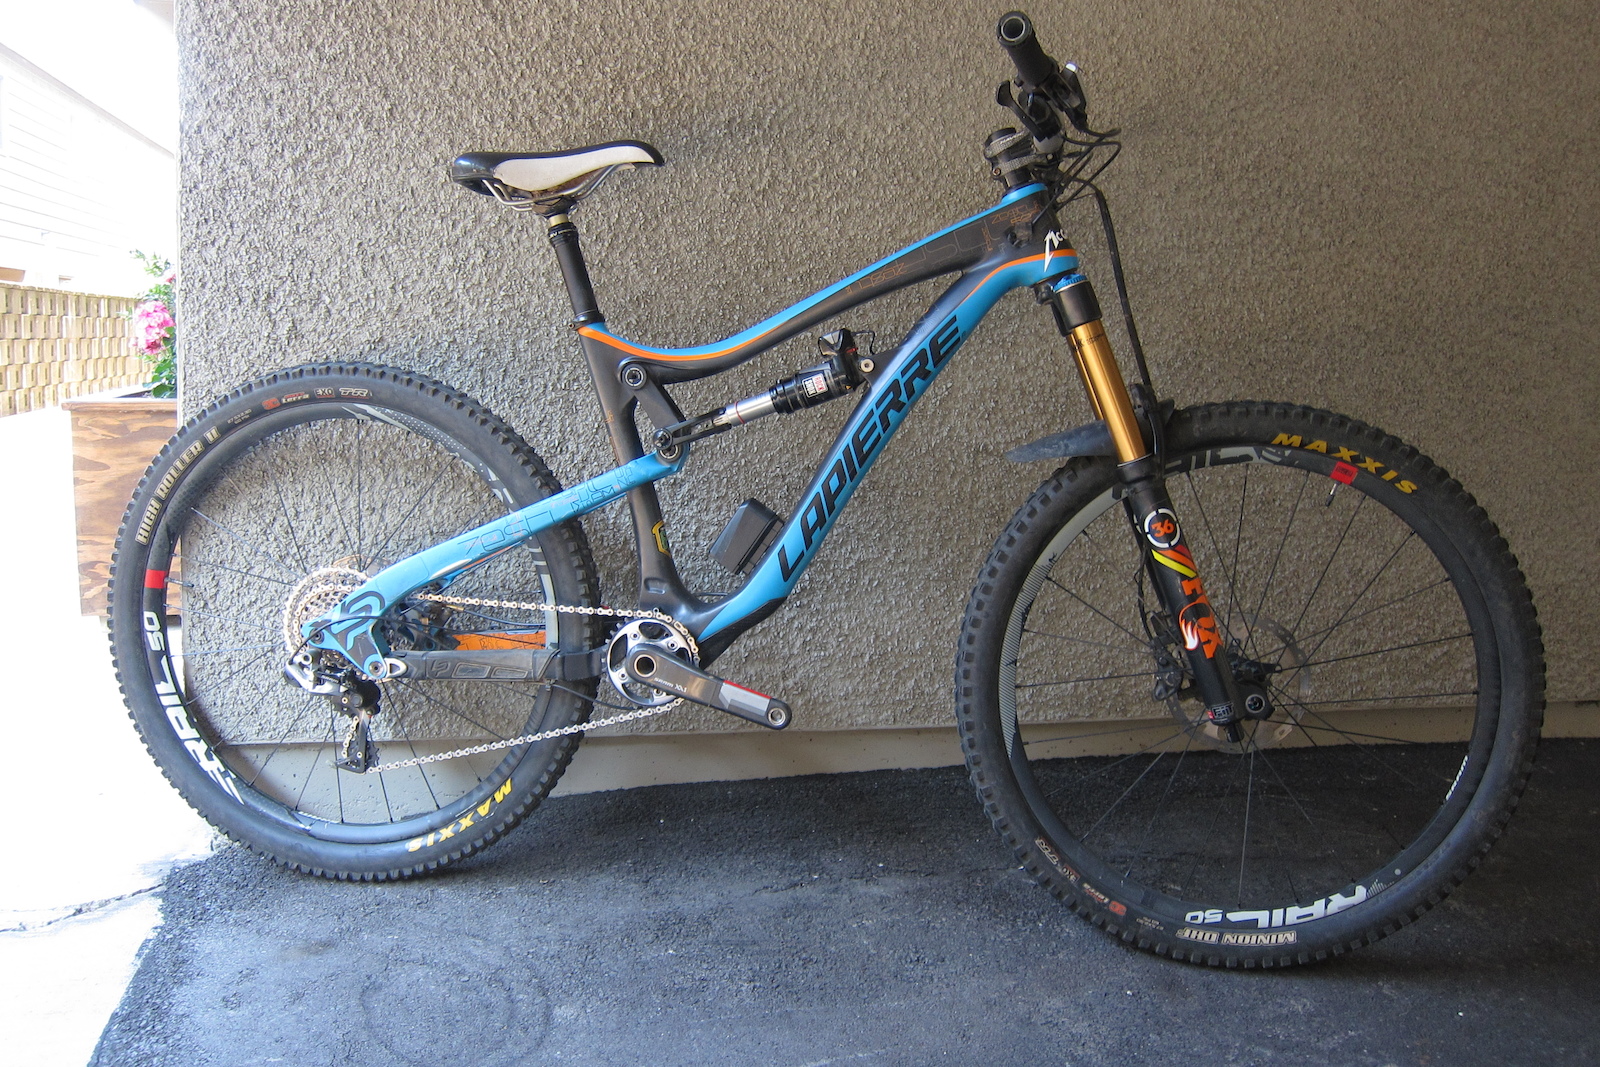 this is the bike i'm selling. it's a lapierre zesty 527 AM